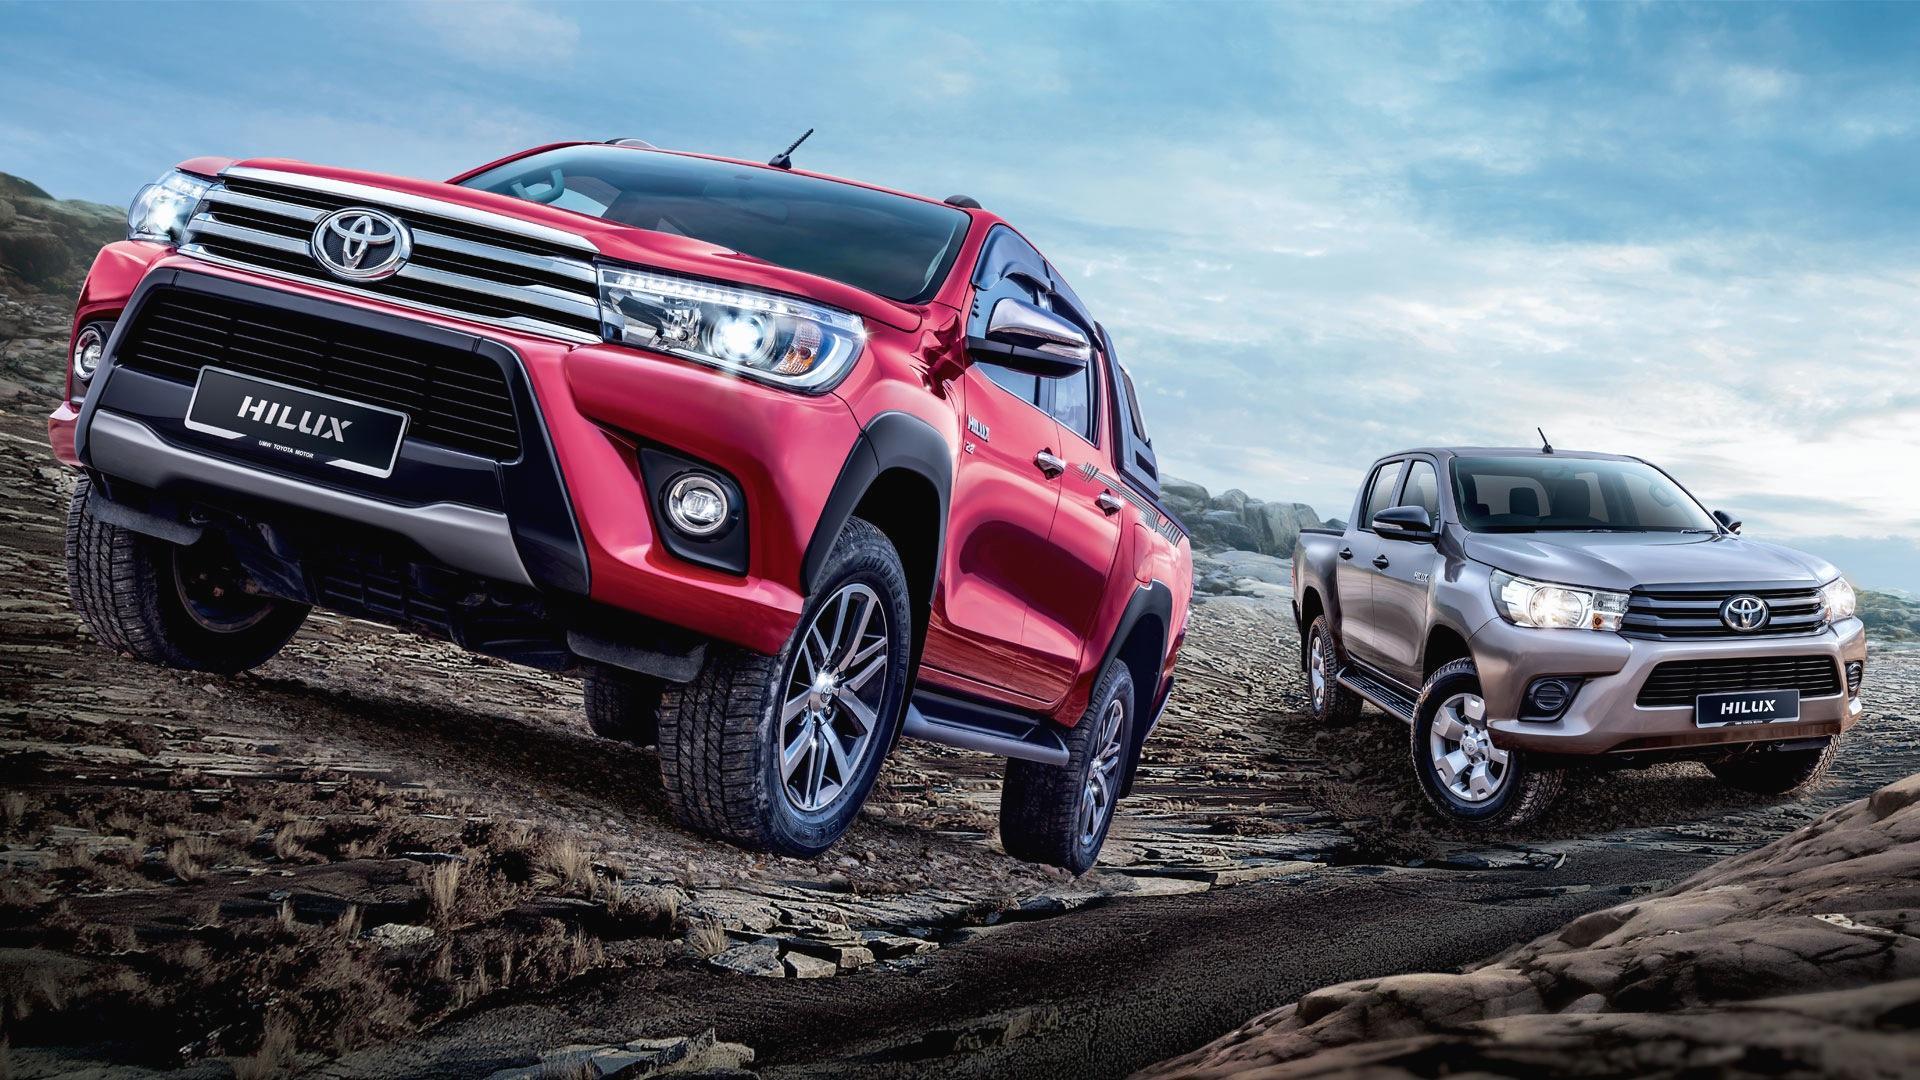 Toyota Hilux Wallpaper, image collections of wallpaper